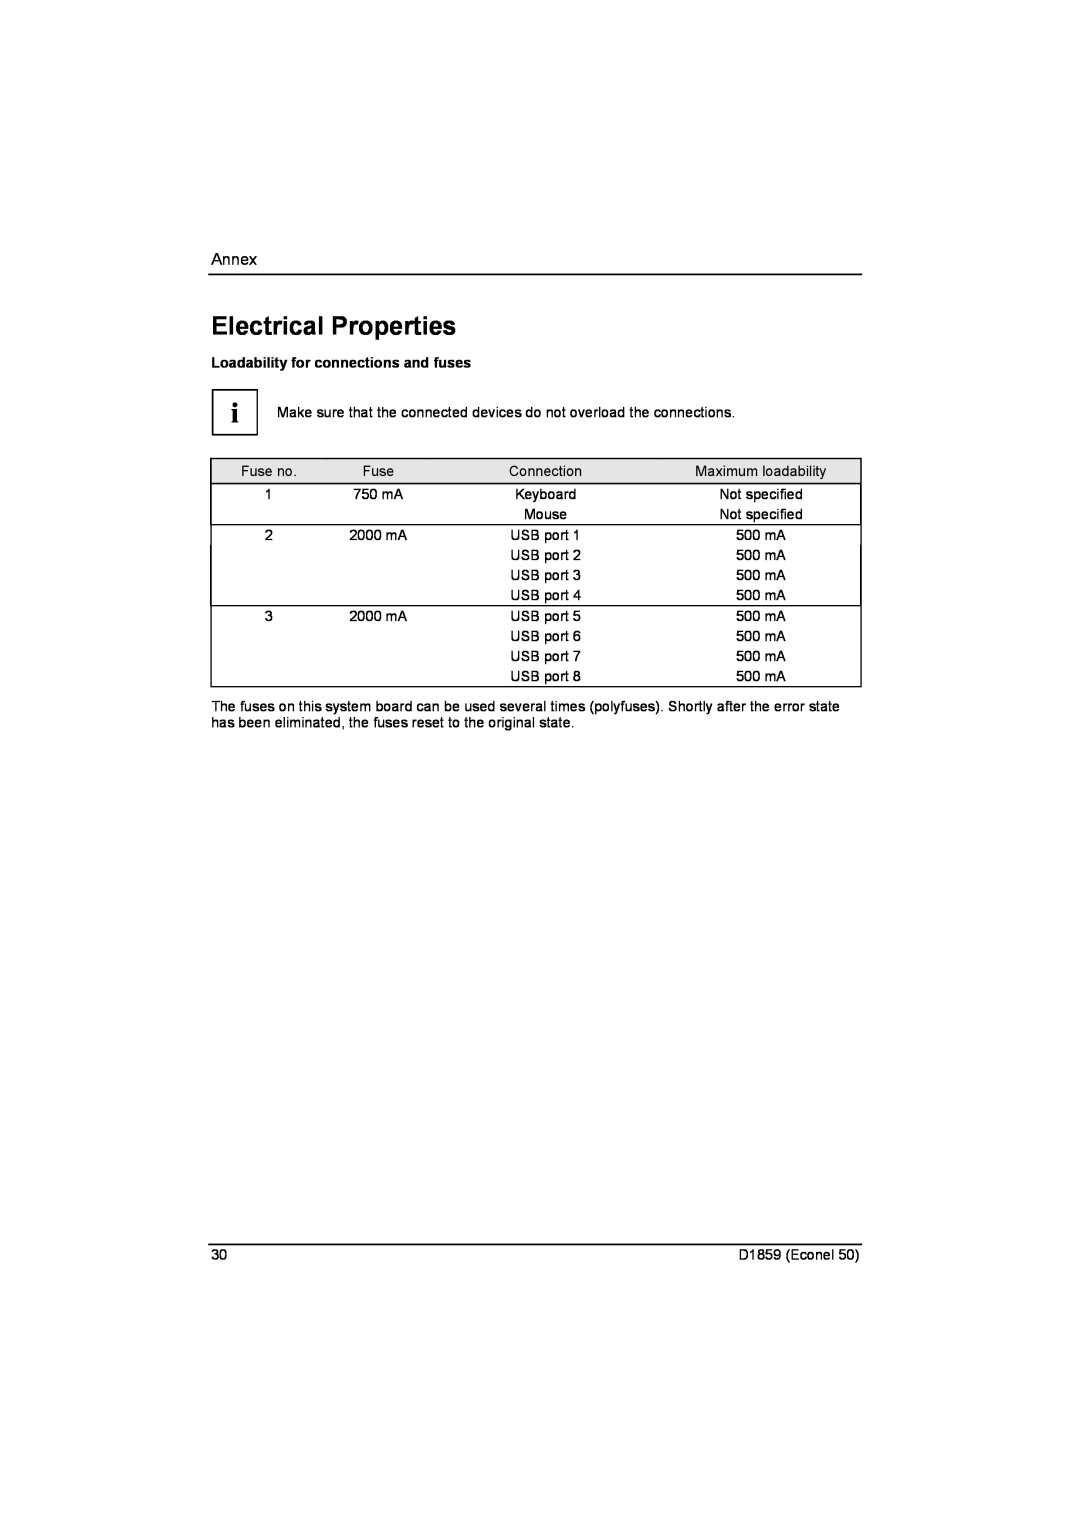 Fujitsu D1859 technical manual Electrical Properties, Annex, Loadability for connections and fuses 